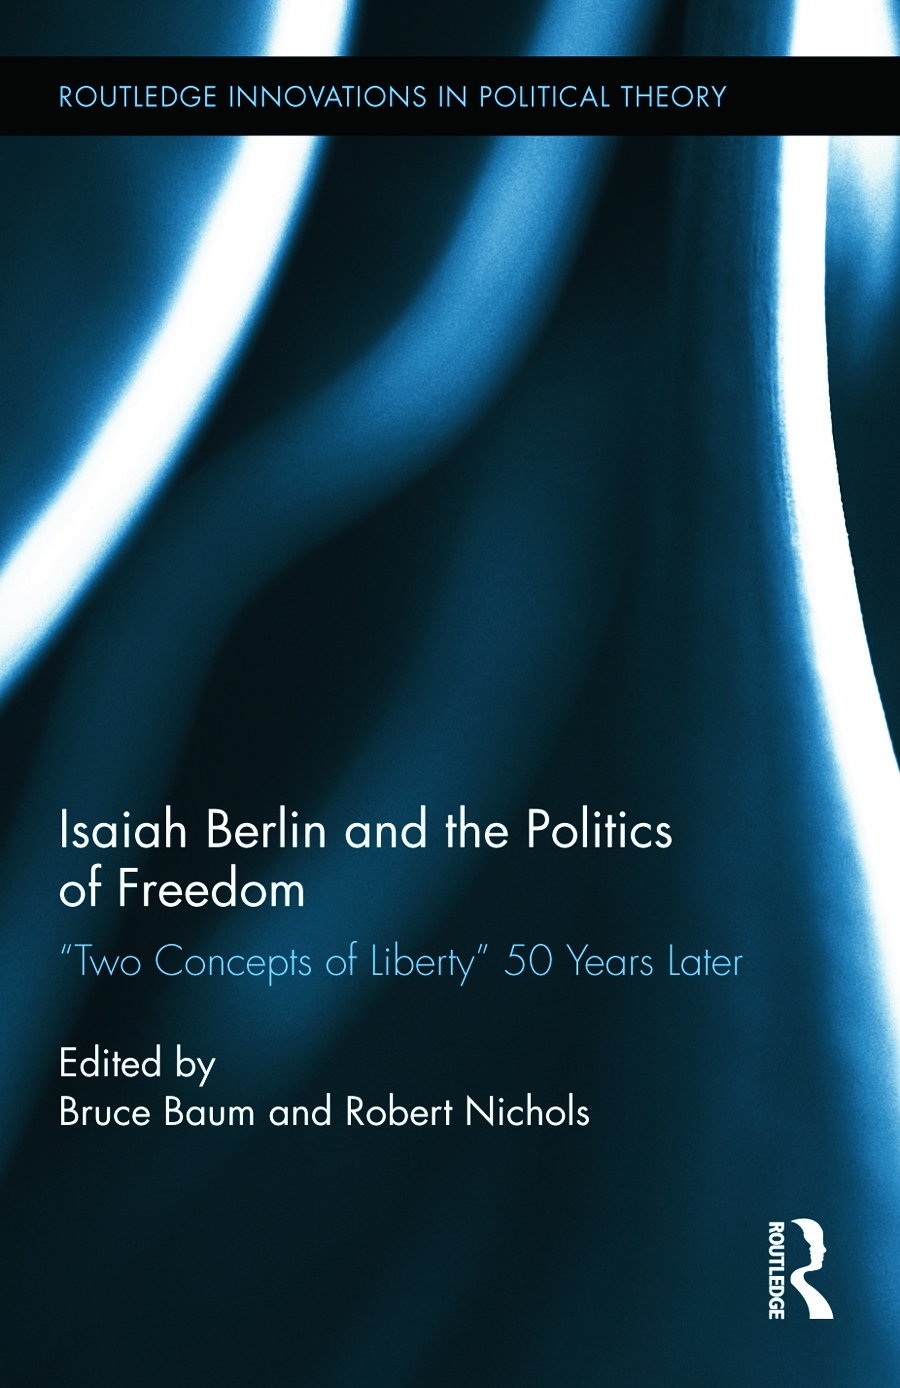 Isaiah Berlin and the Politics of Freedom: Two Concepts of Liberty 50 Years Later